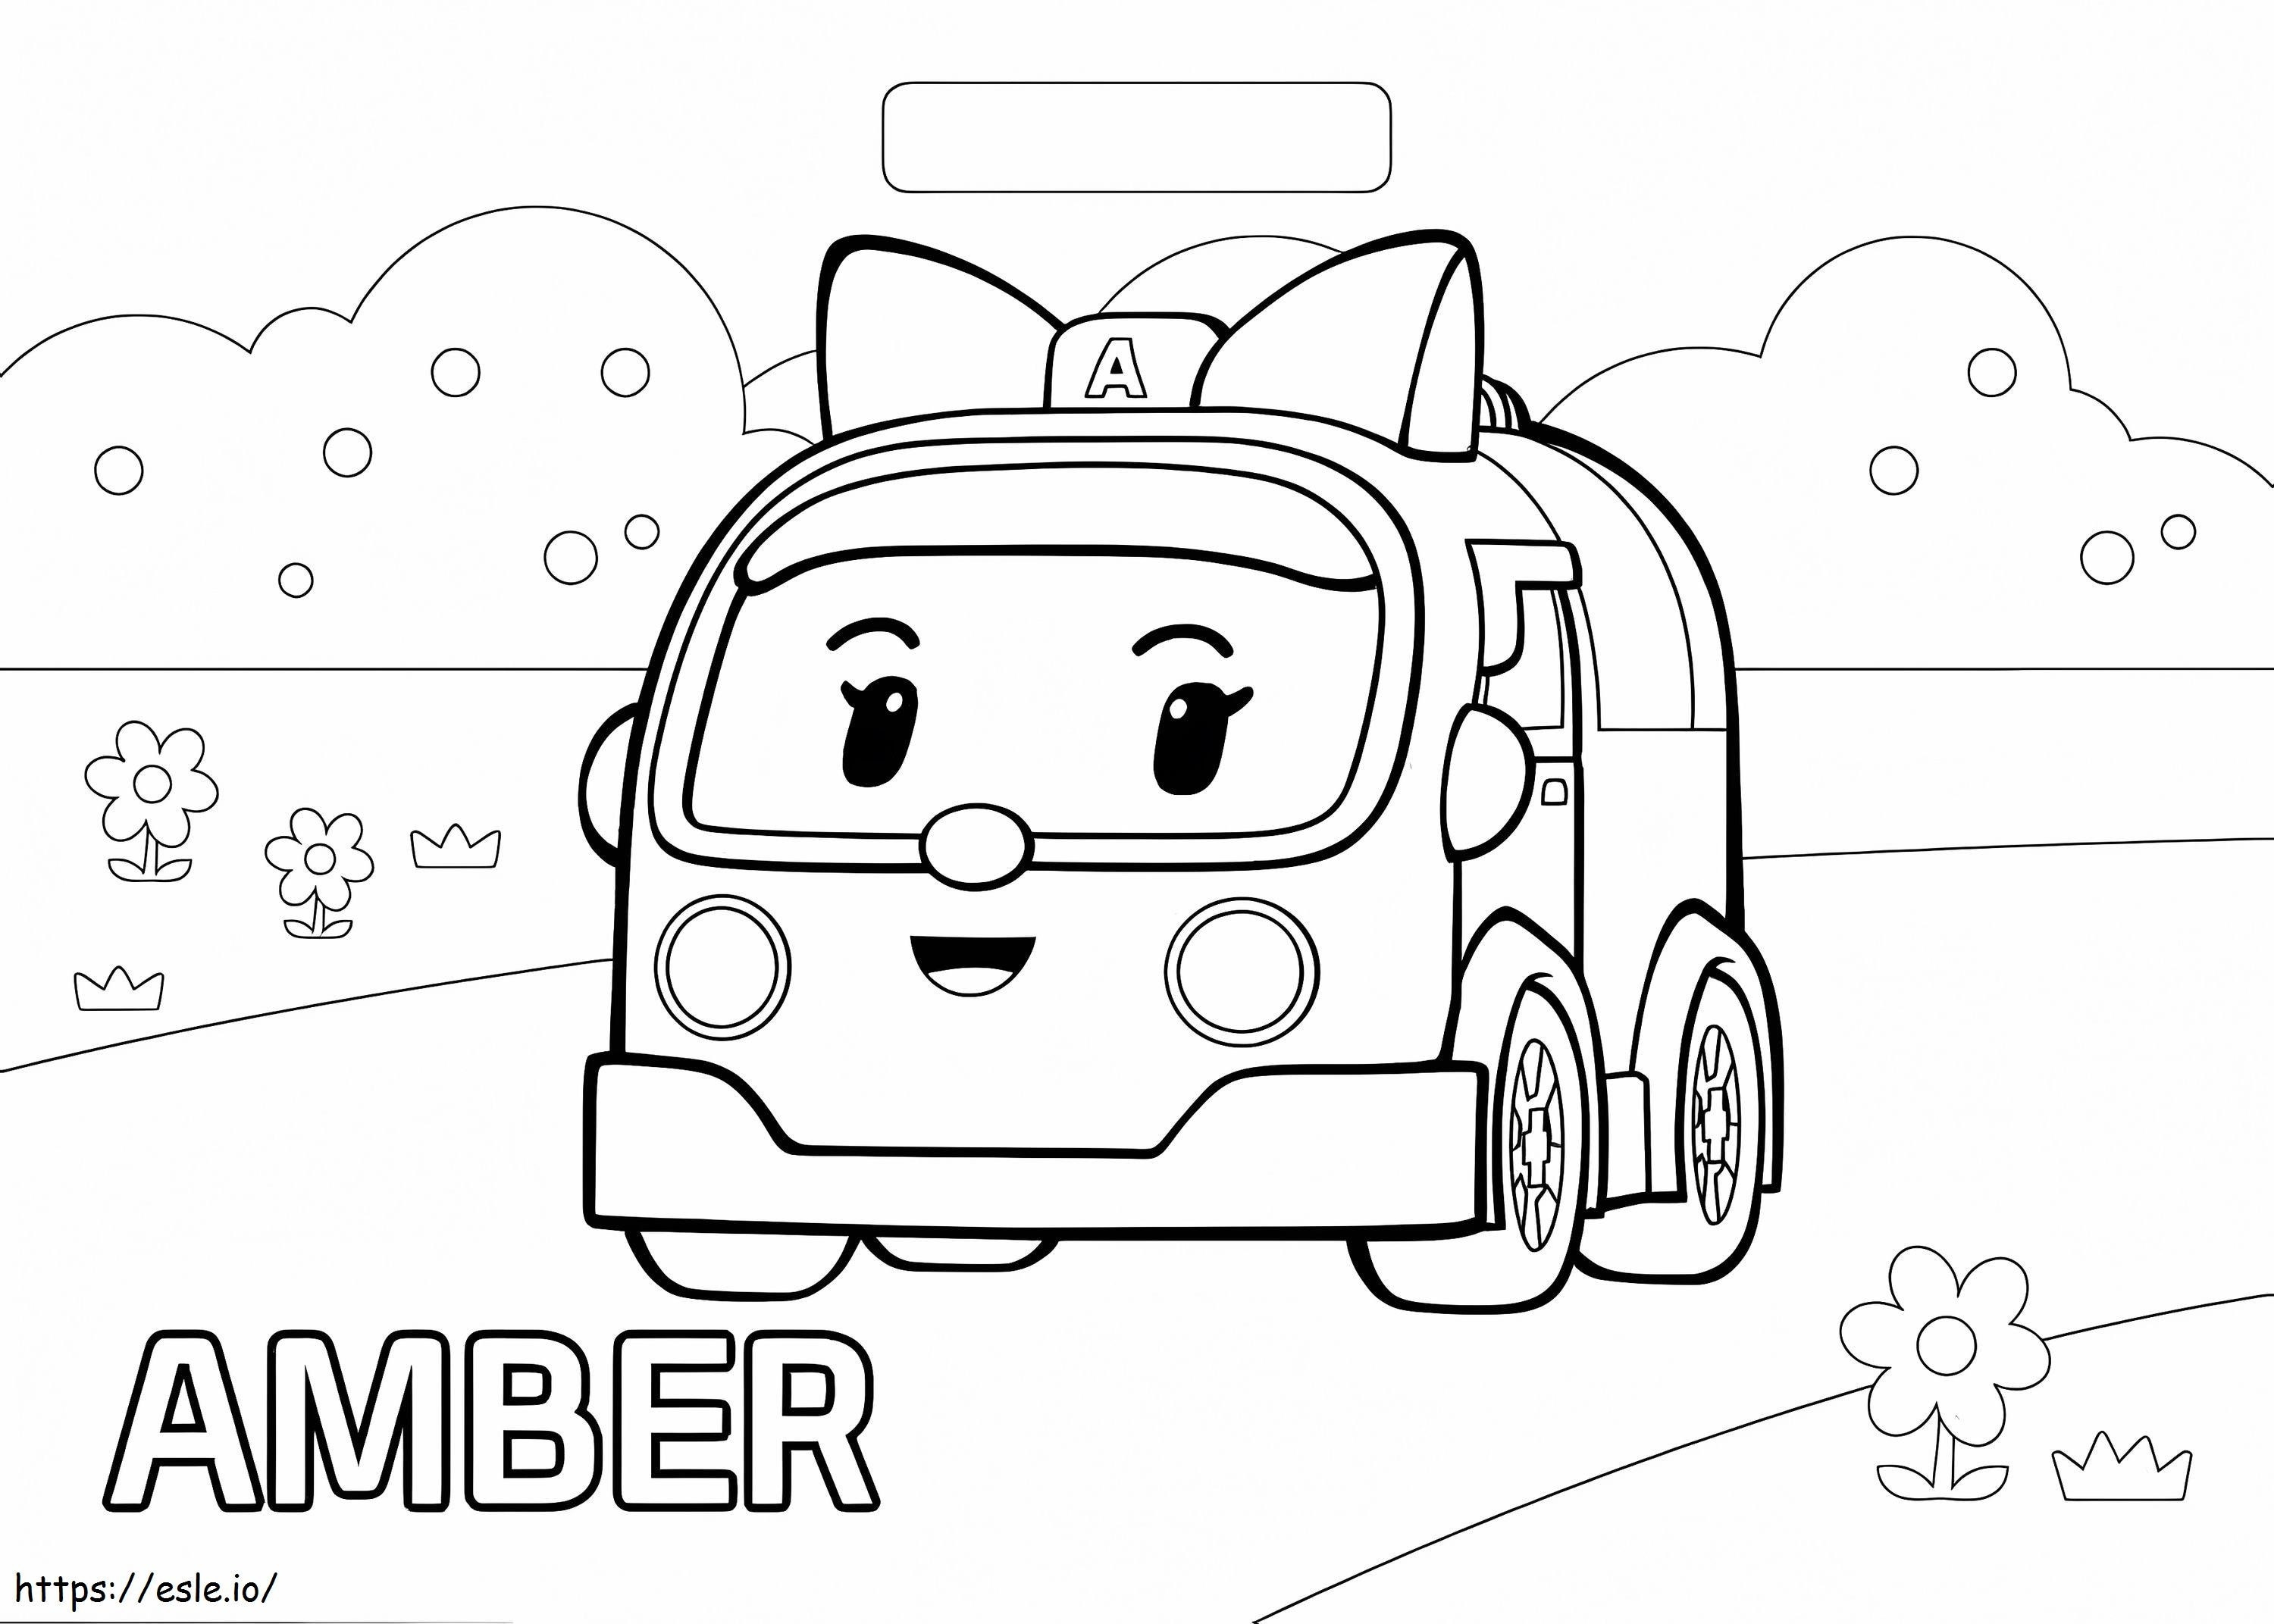 Robocar Poly Amber coloring page